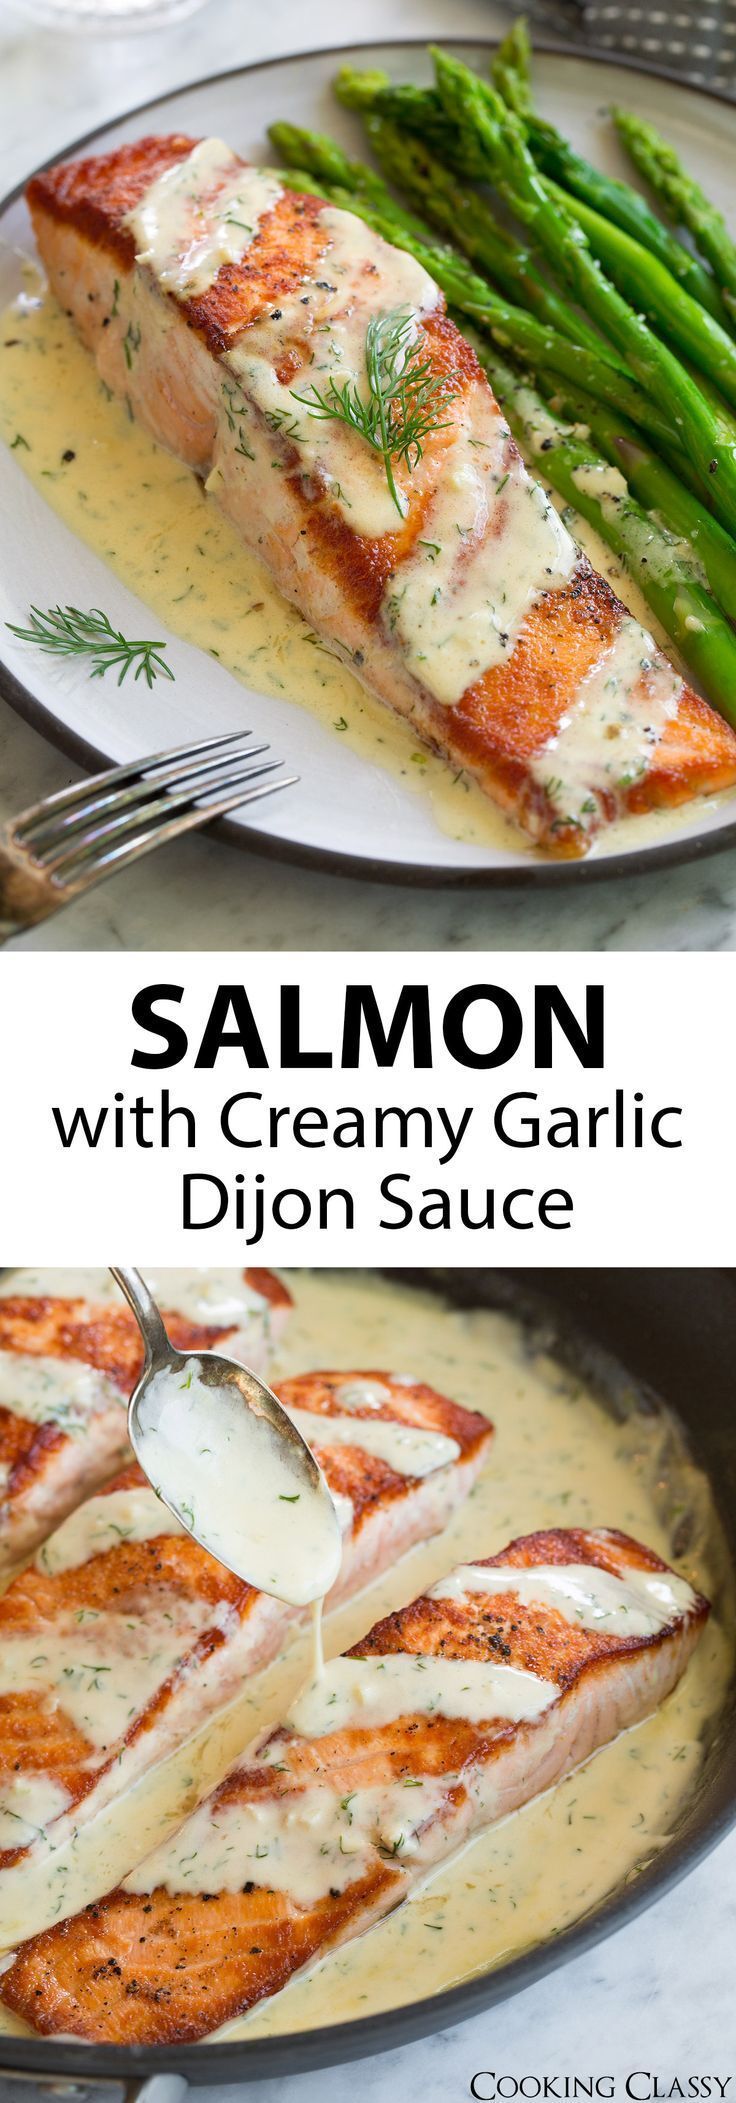 Salmon with Creamy Garlic Dijon Sauce - This is such a flavorful, -   18 salmon recipes ideas